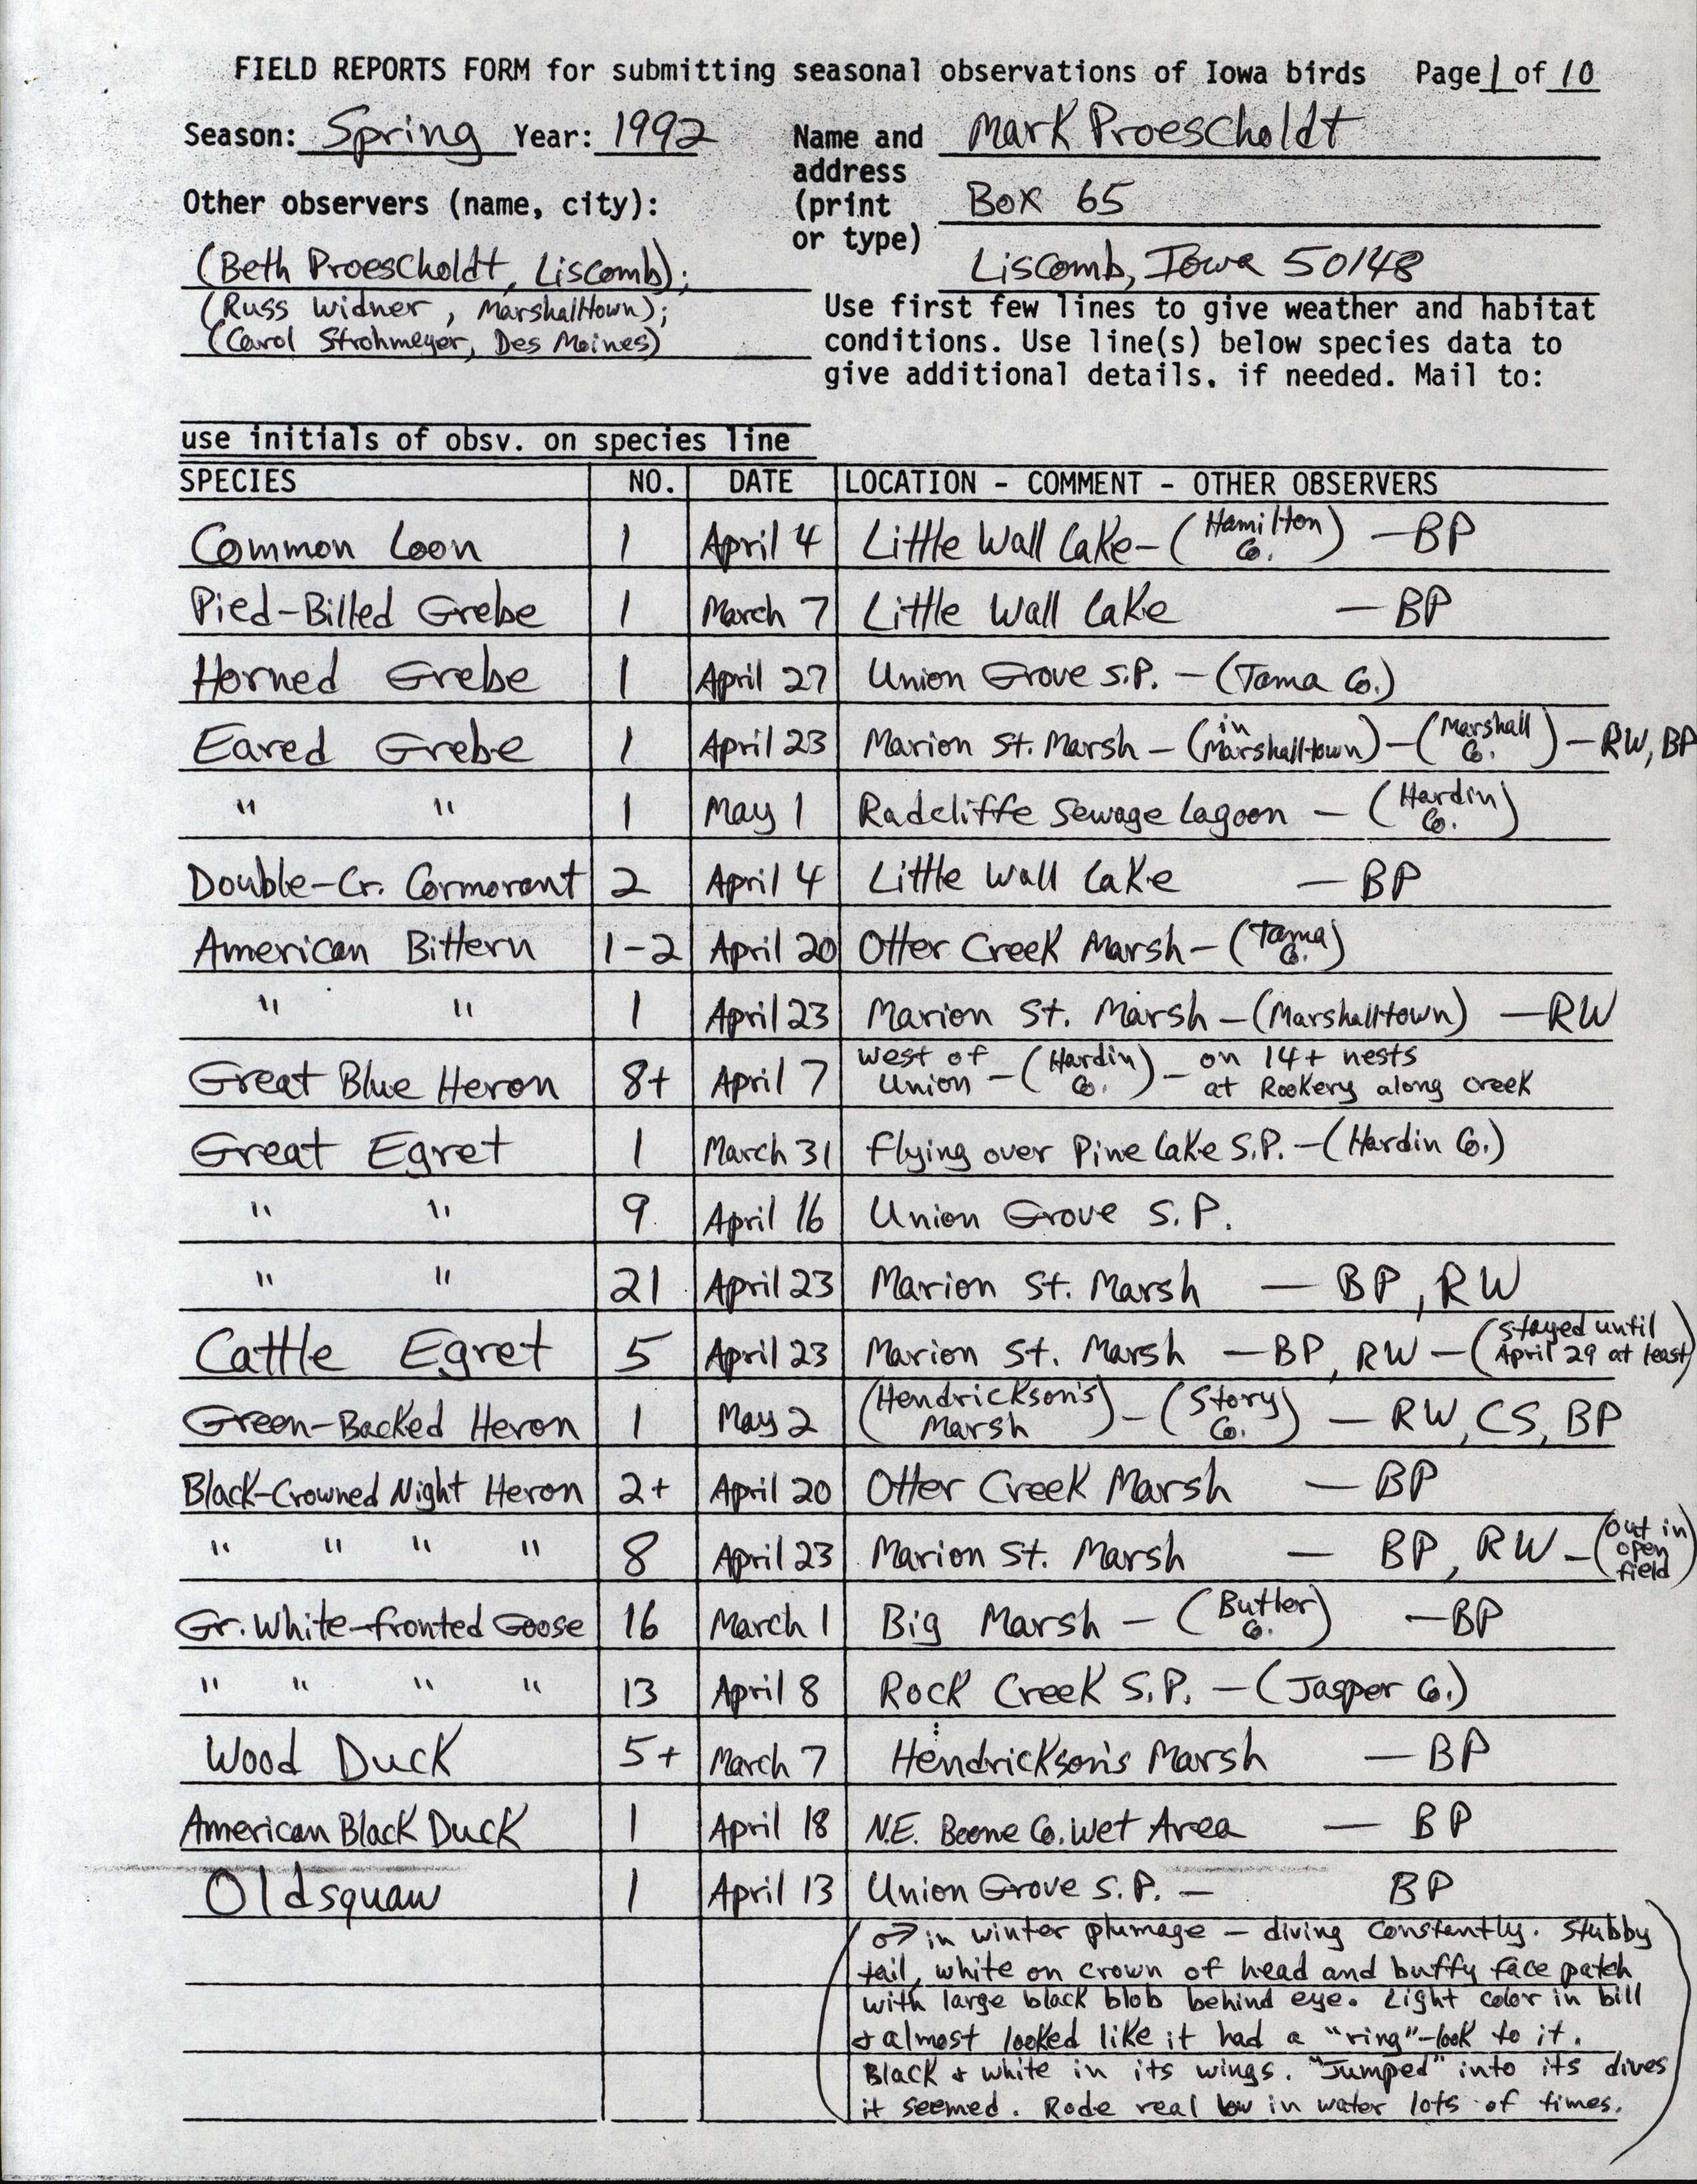 Field reports form for submitting seasonal observations of Iowa birds, Mark Proescholdt, spring 1992